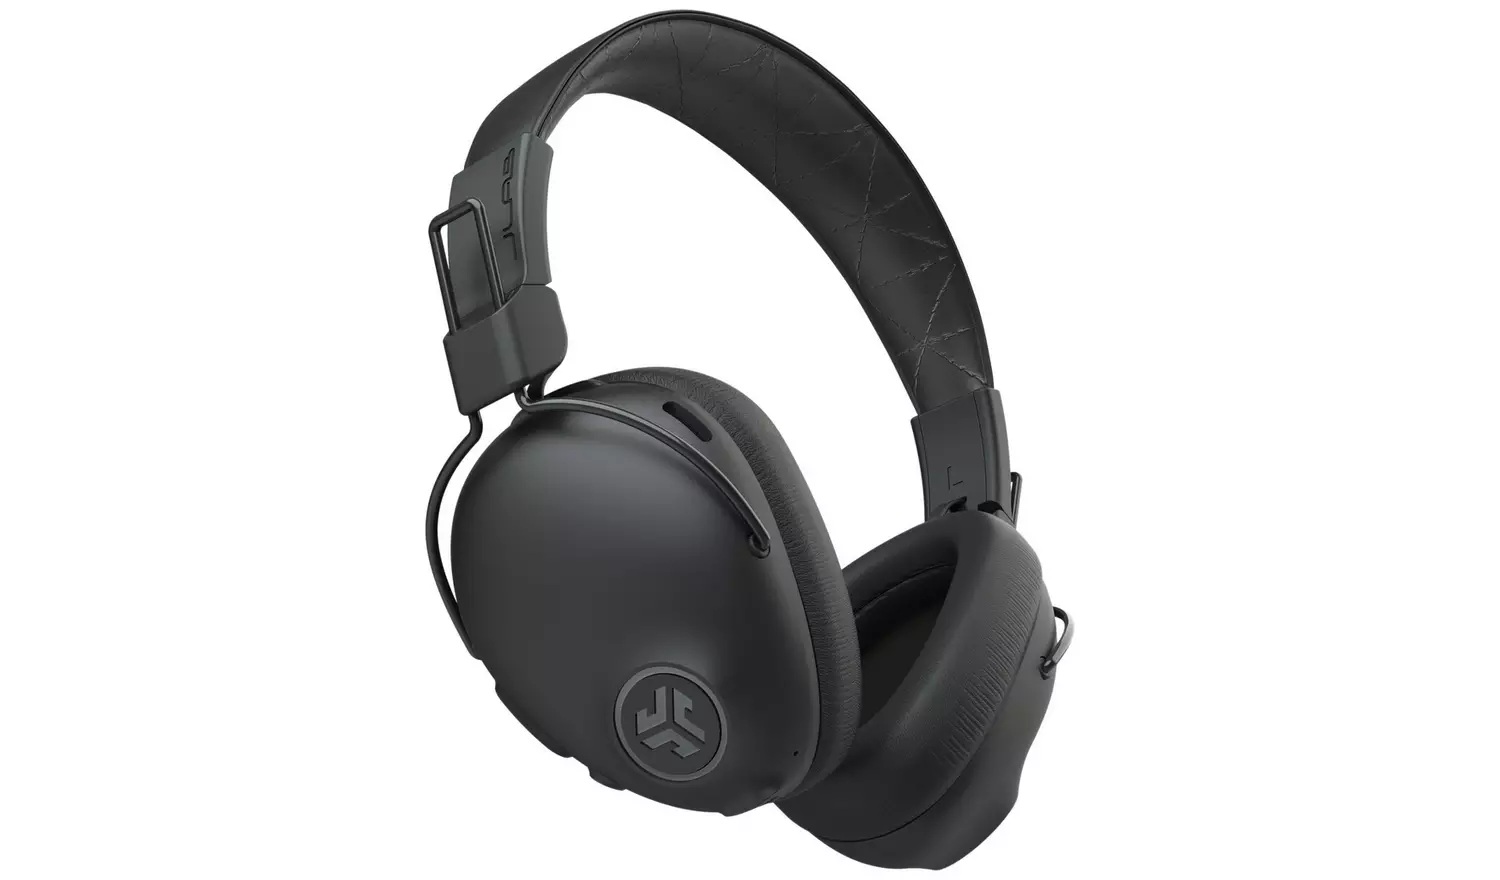 JLAB Studio Pro ANC wireless headphones with Smart Active
Noise Cancelling, 45-hour battery &amp; three EQ3 sound modes
launched